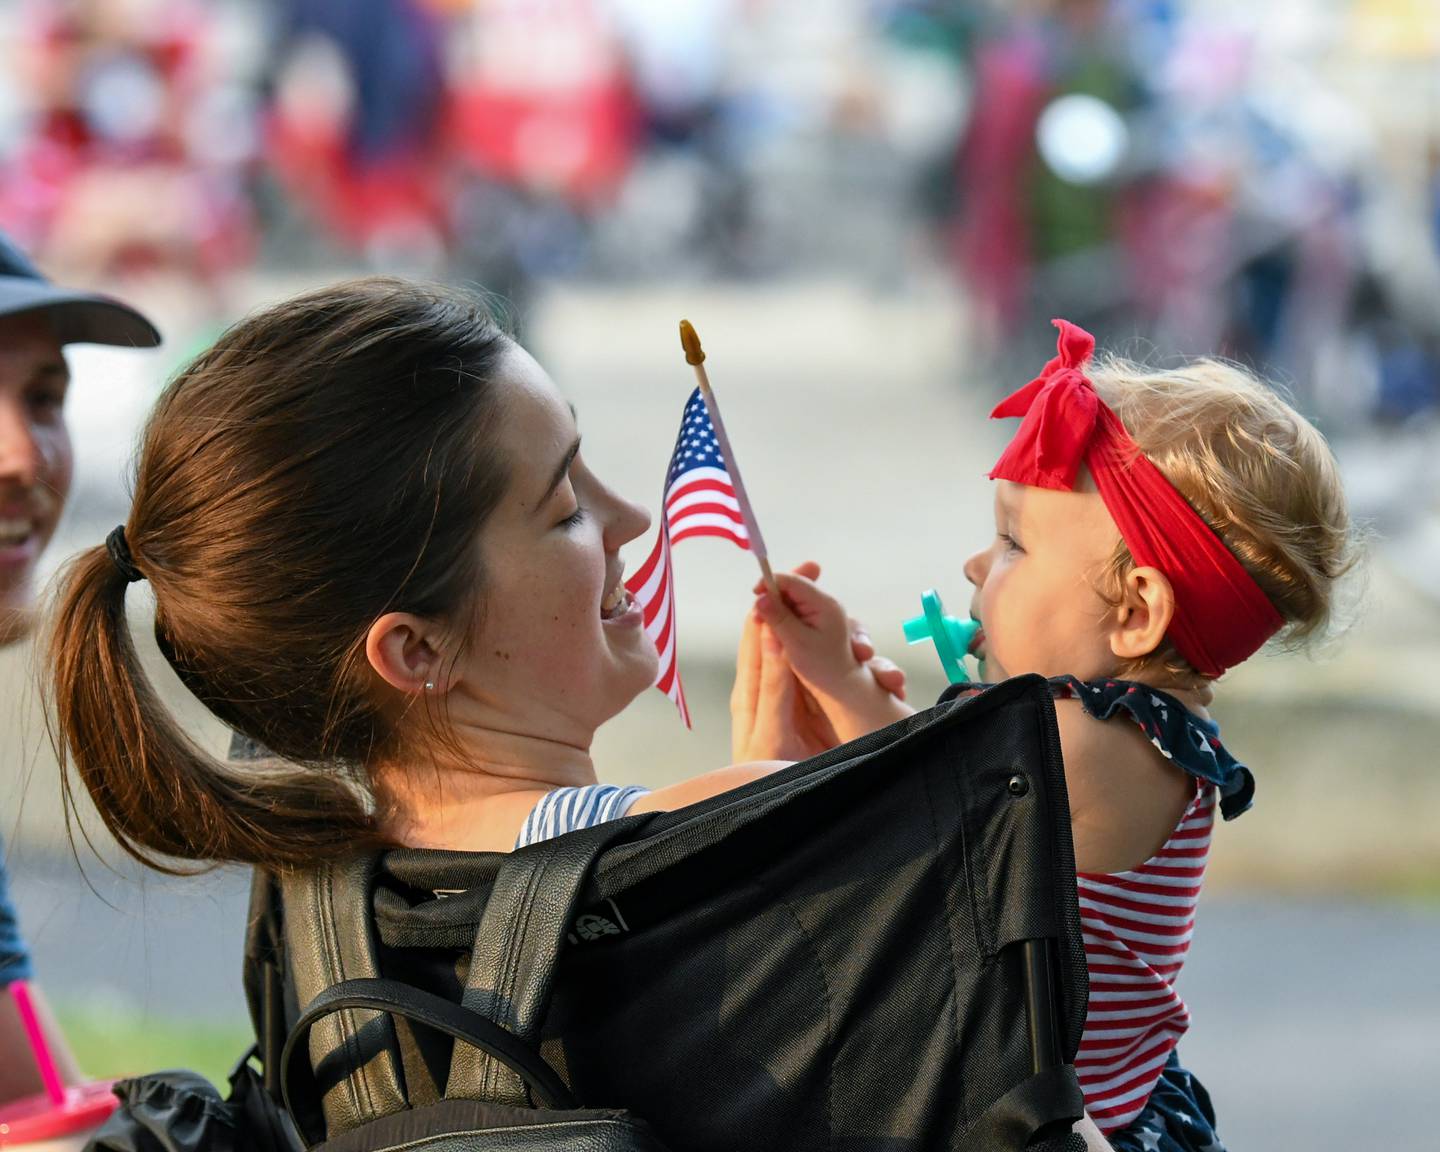 Haven Volz, 1, of DeKalb waves an American flag near her aunt Rachel Schad (left) of DeKalb as they wait for the fireworks show to start at Hopkins Park in DeKalb on Monday, July 4, 2022.